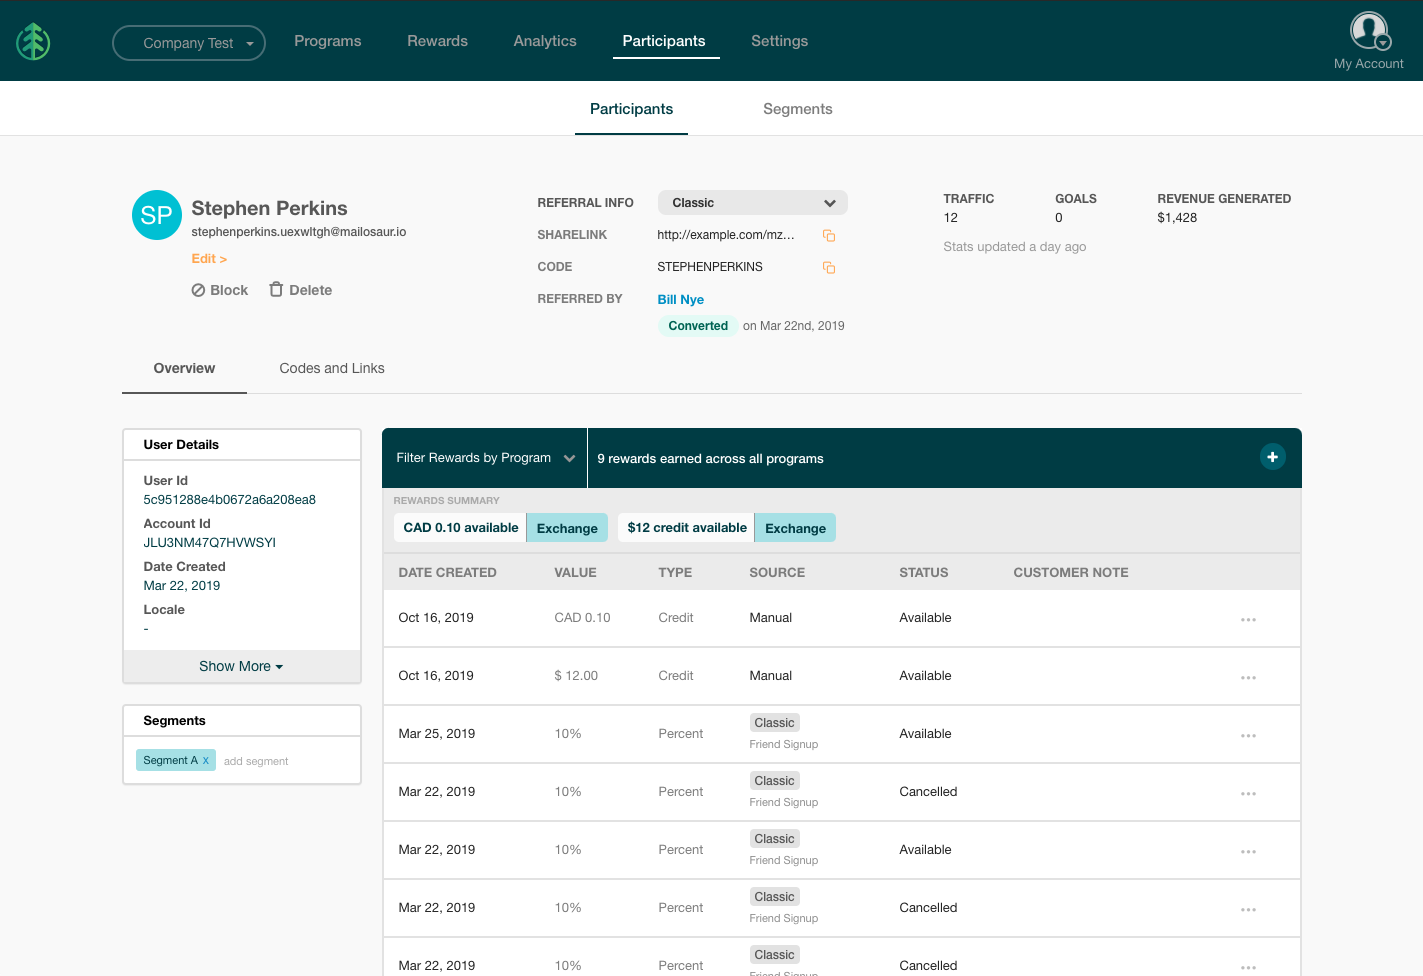 SaaSquatch Software - Manage advocate profiles, reward history, codes and links all in one place, and segment participants to provide targeted rewards.